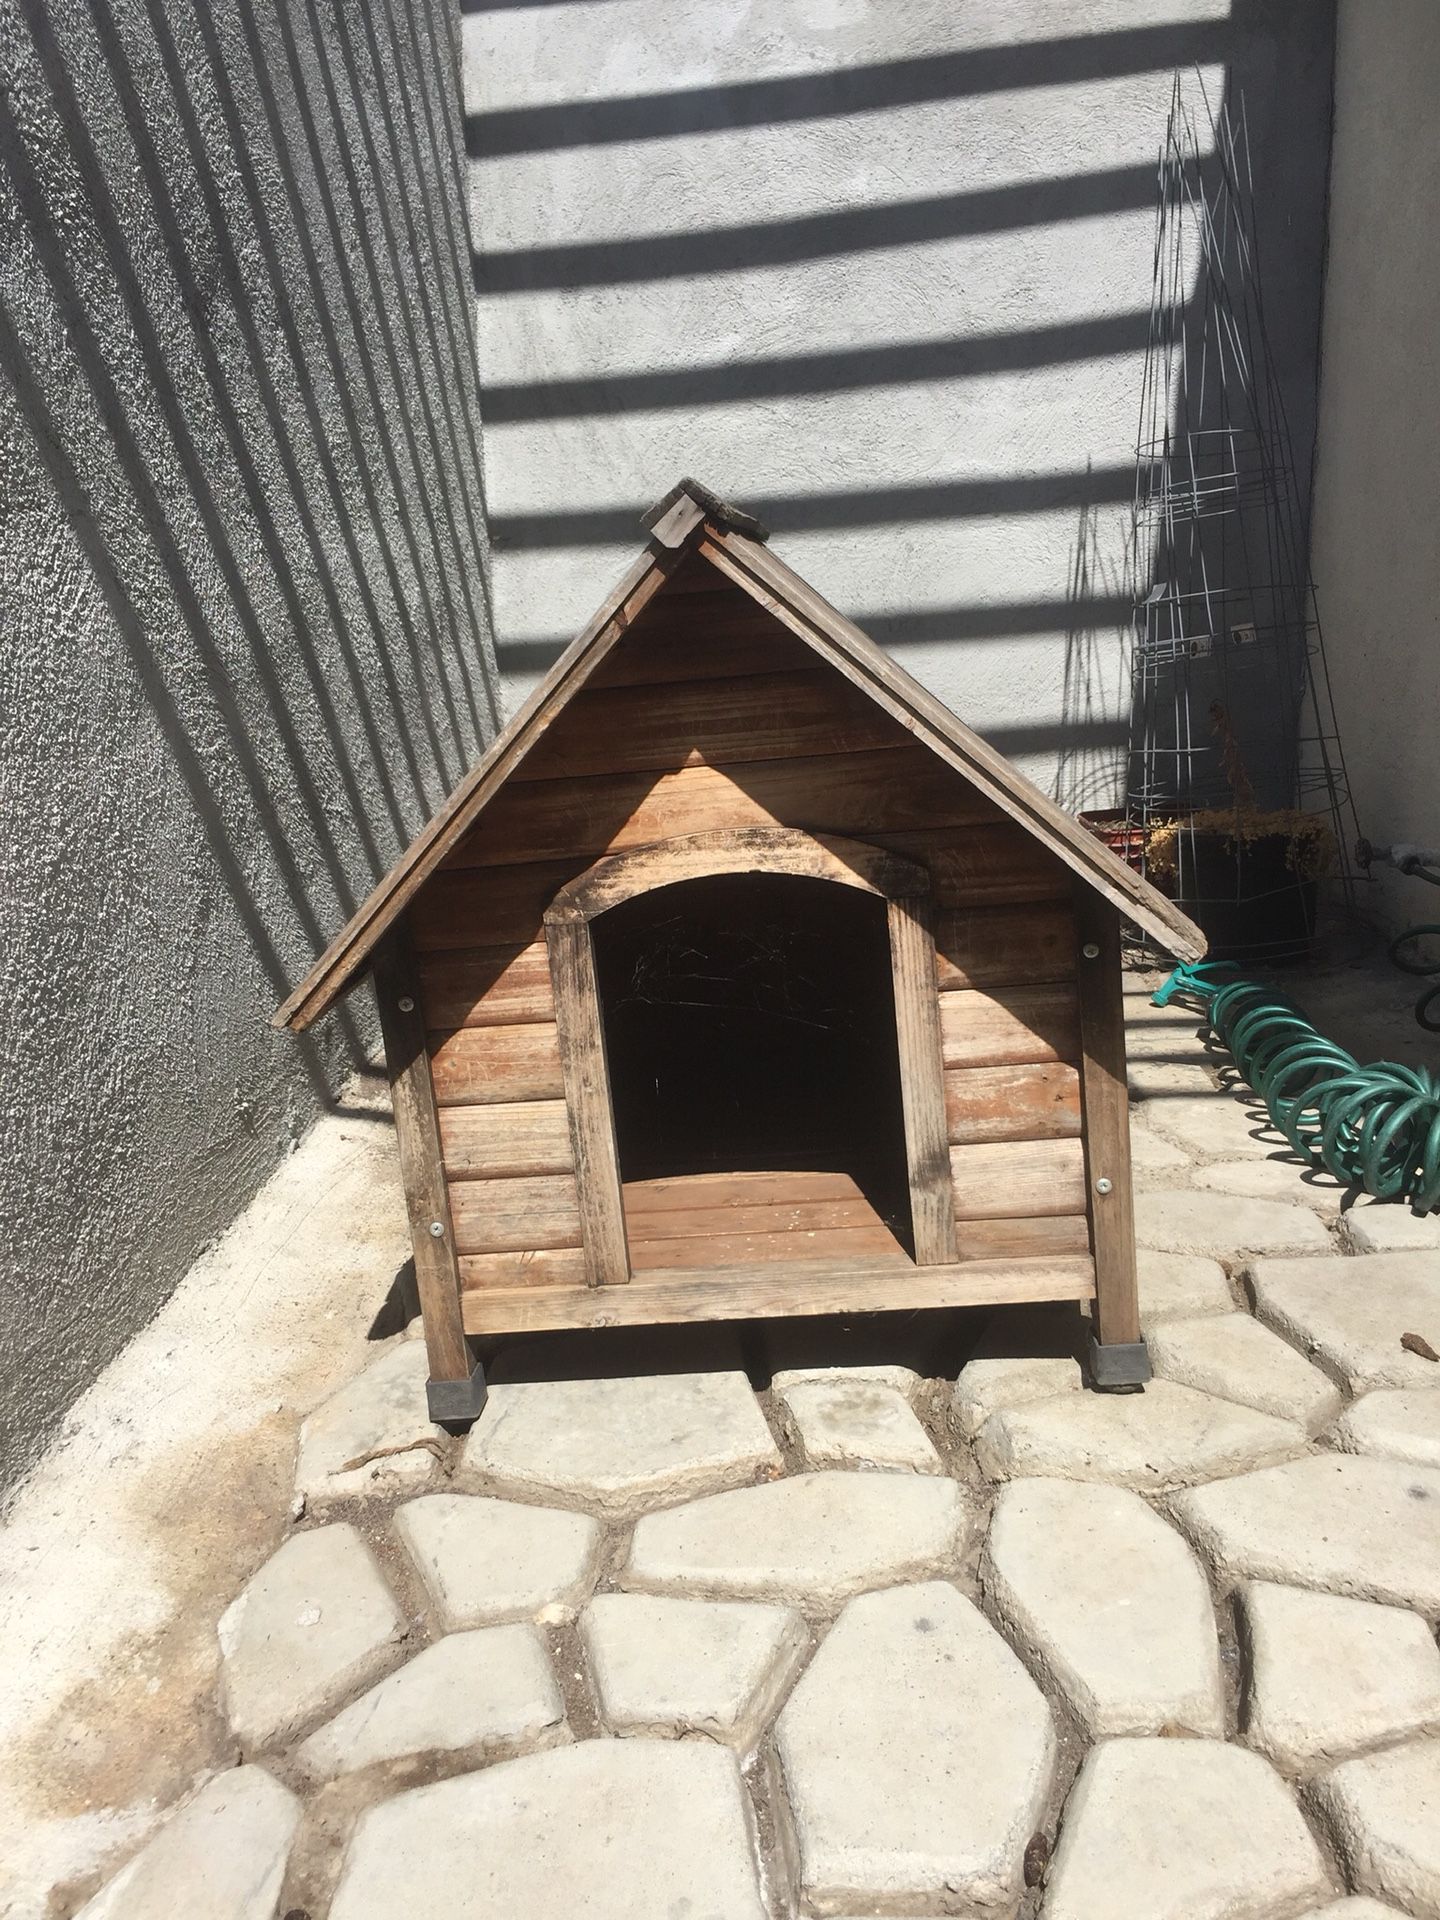 Small wooden dog house